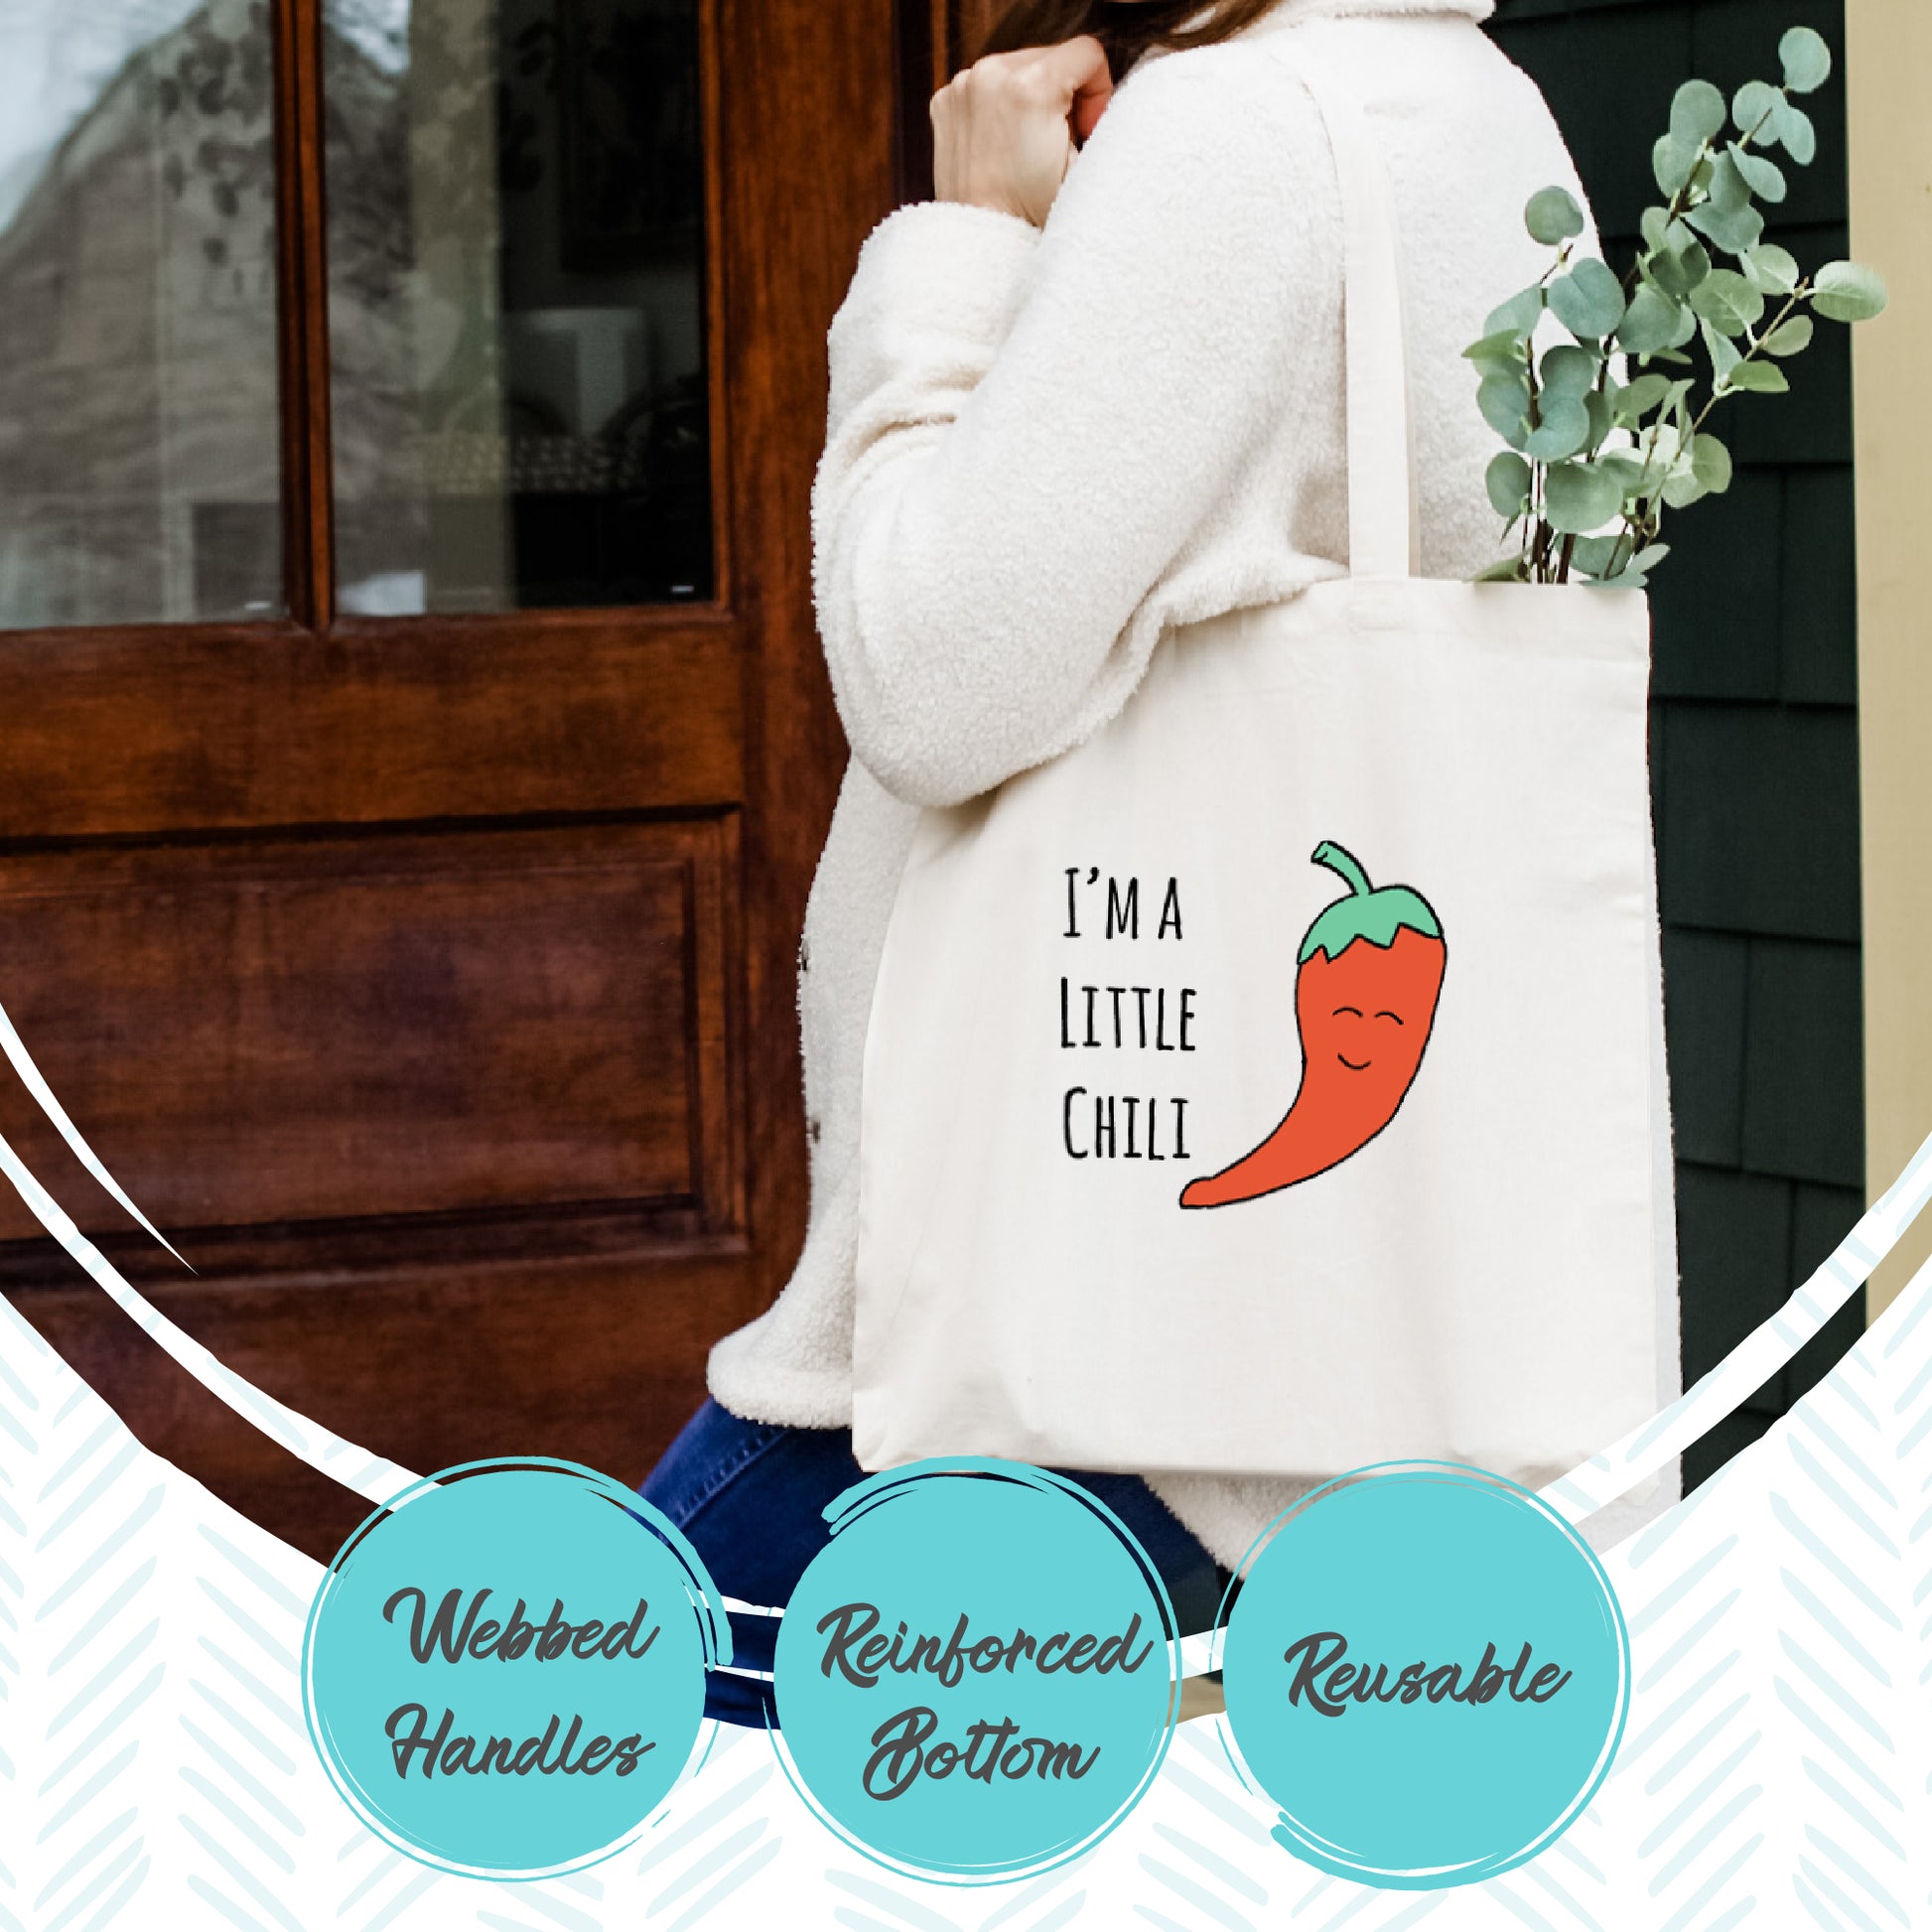 I Was Hangry Forgive Me - Full Color Tote - MoonlightMakers